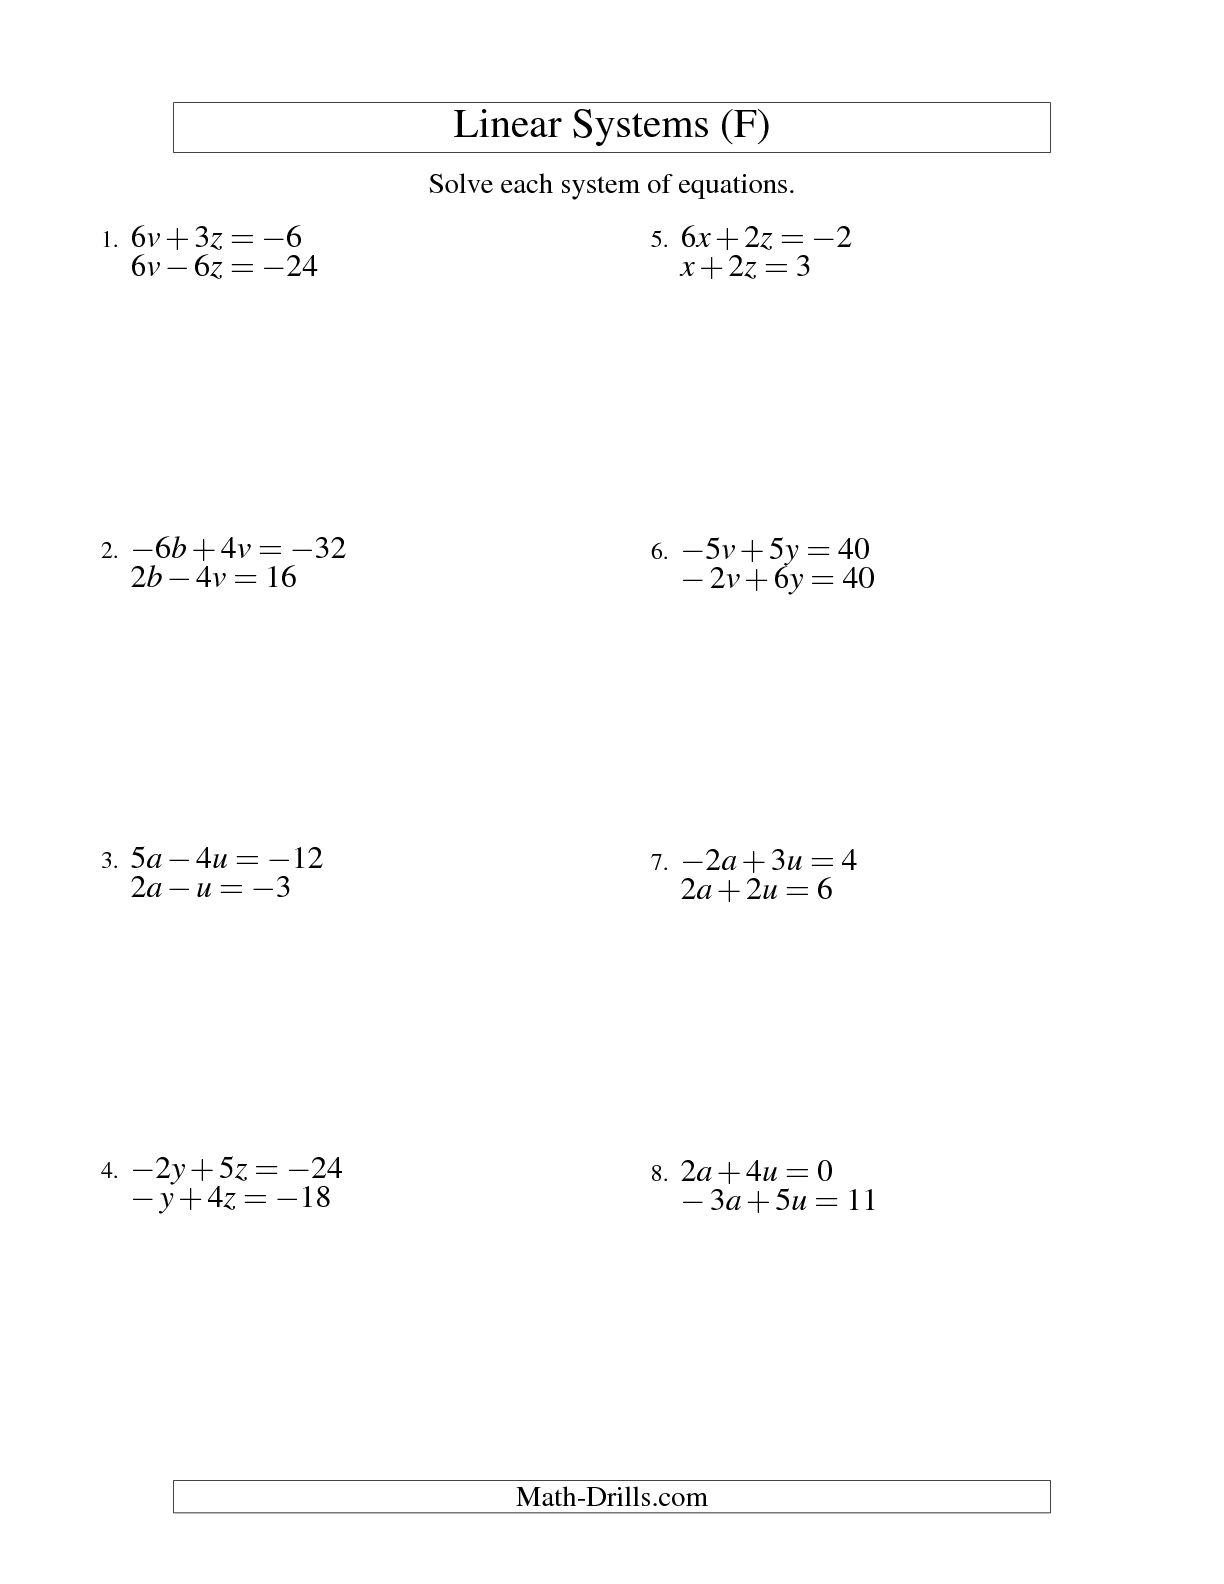 Solving Systems of Equations by Elimination Worksheet Image